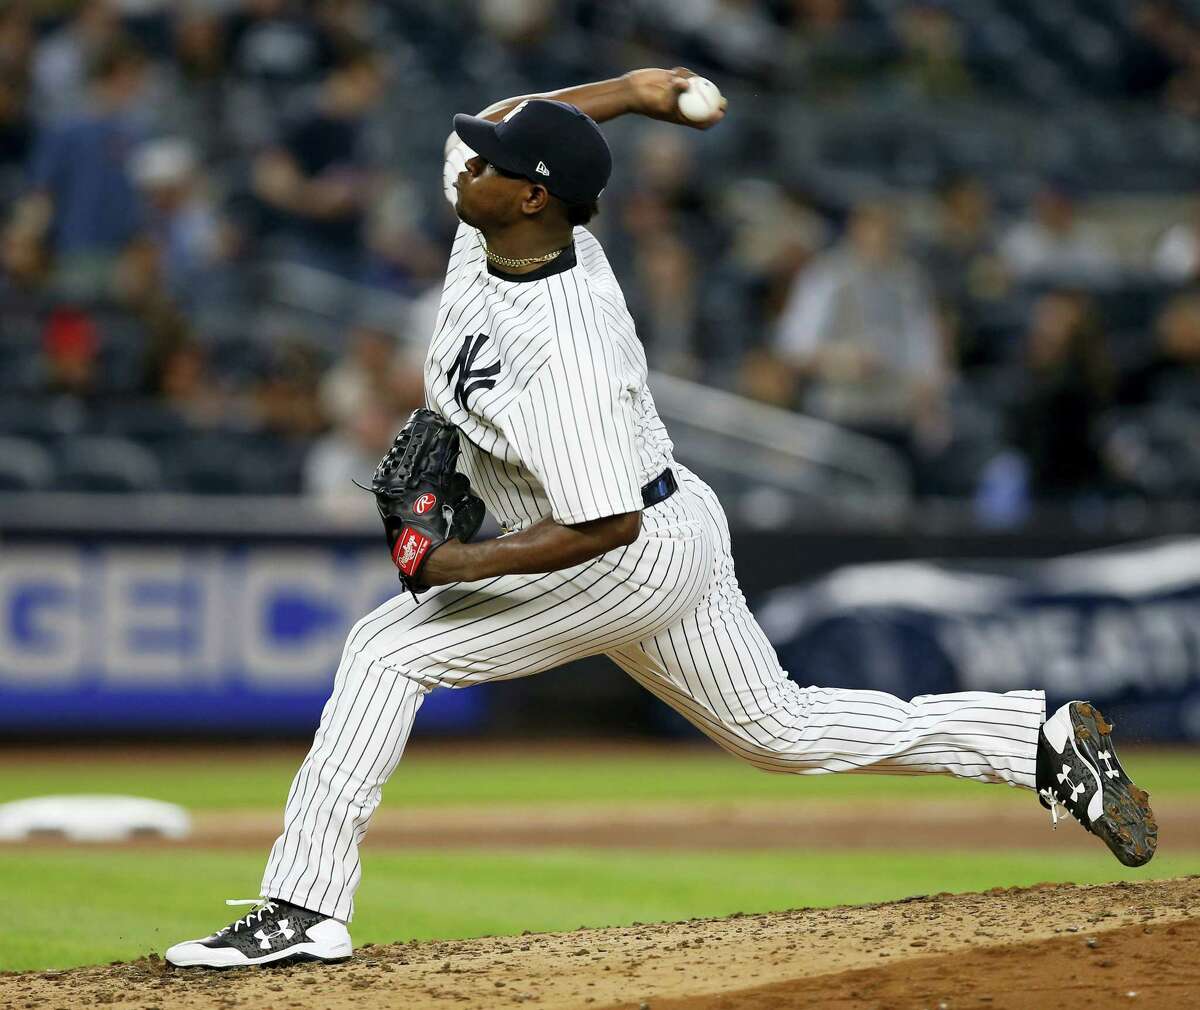 New York Yankees starting pitcher Luis Severino winds up in the sixth inning of a baseball game against the Kansas City Royals at Yankee Stadium in New York, Wednesday. Severino was the winning pitcher in the Yankees’ 3-0 shutout of the Kansas City Royals.